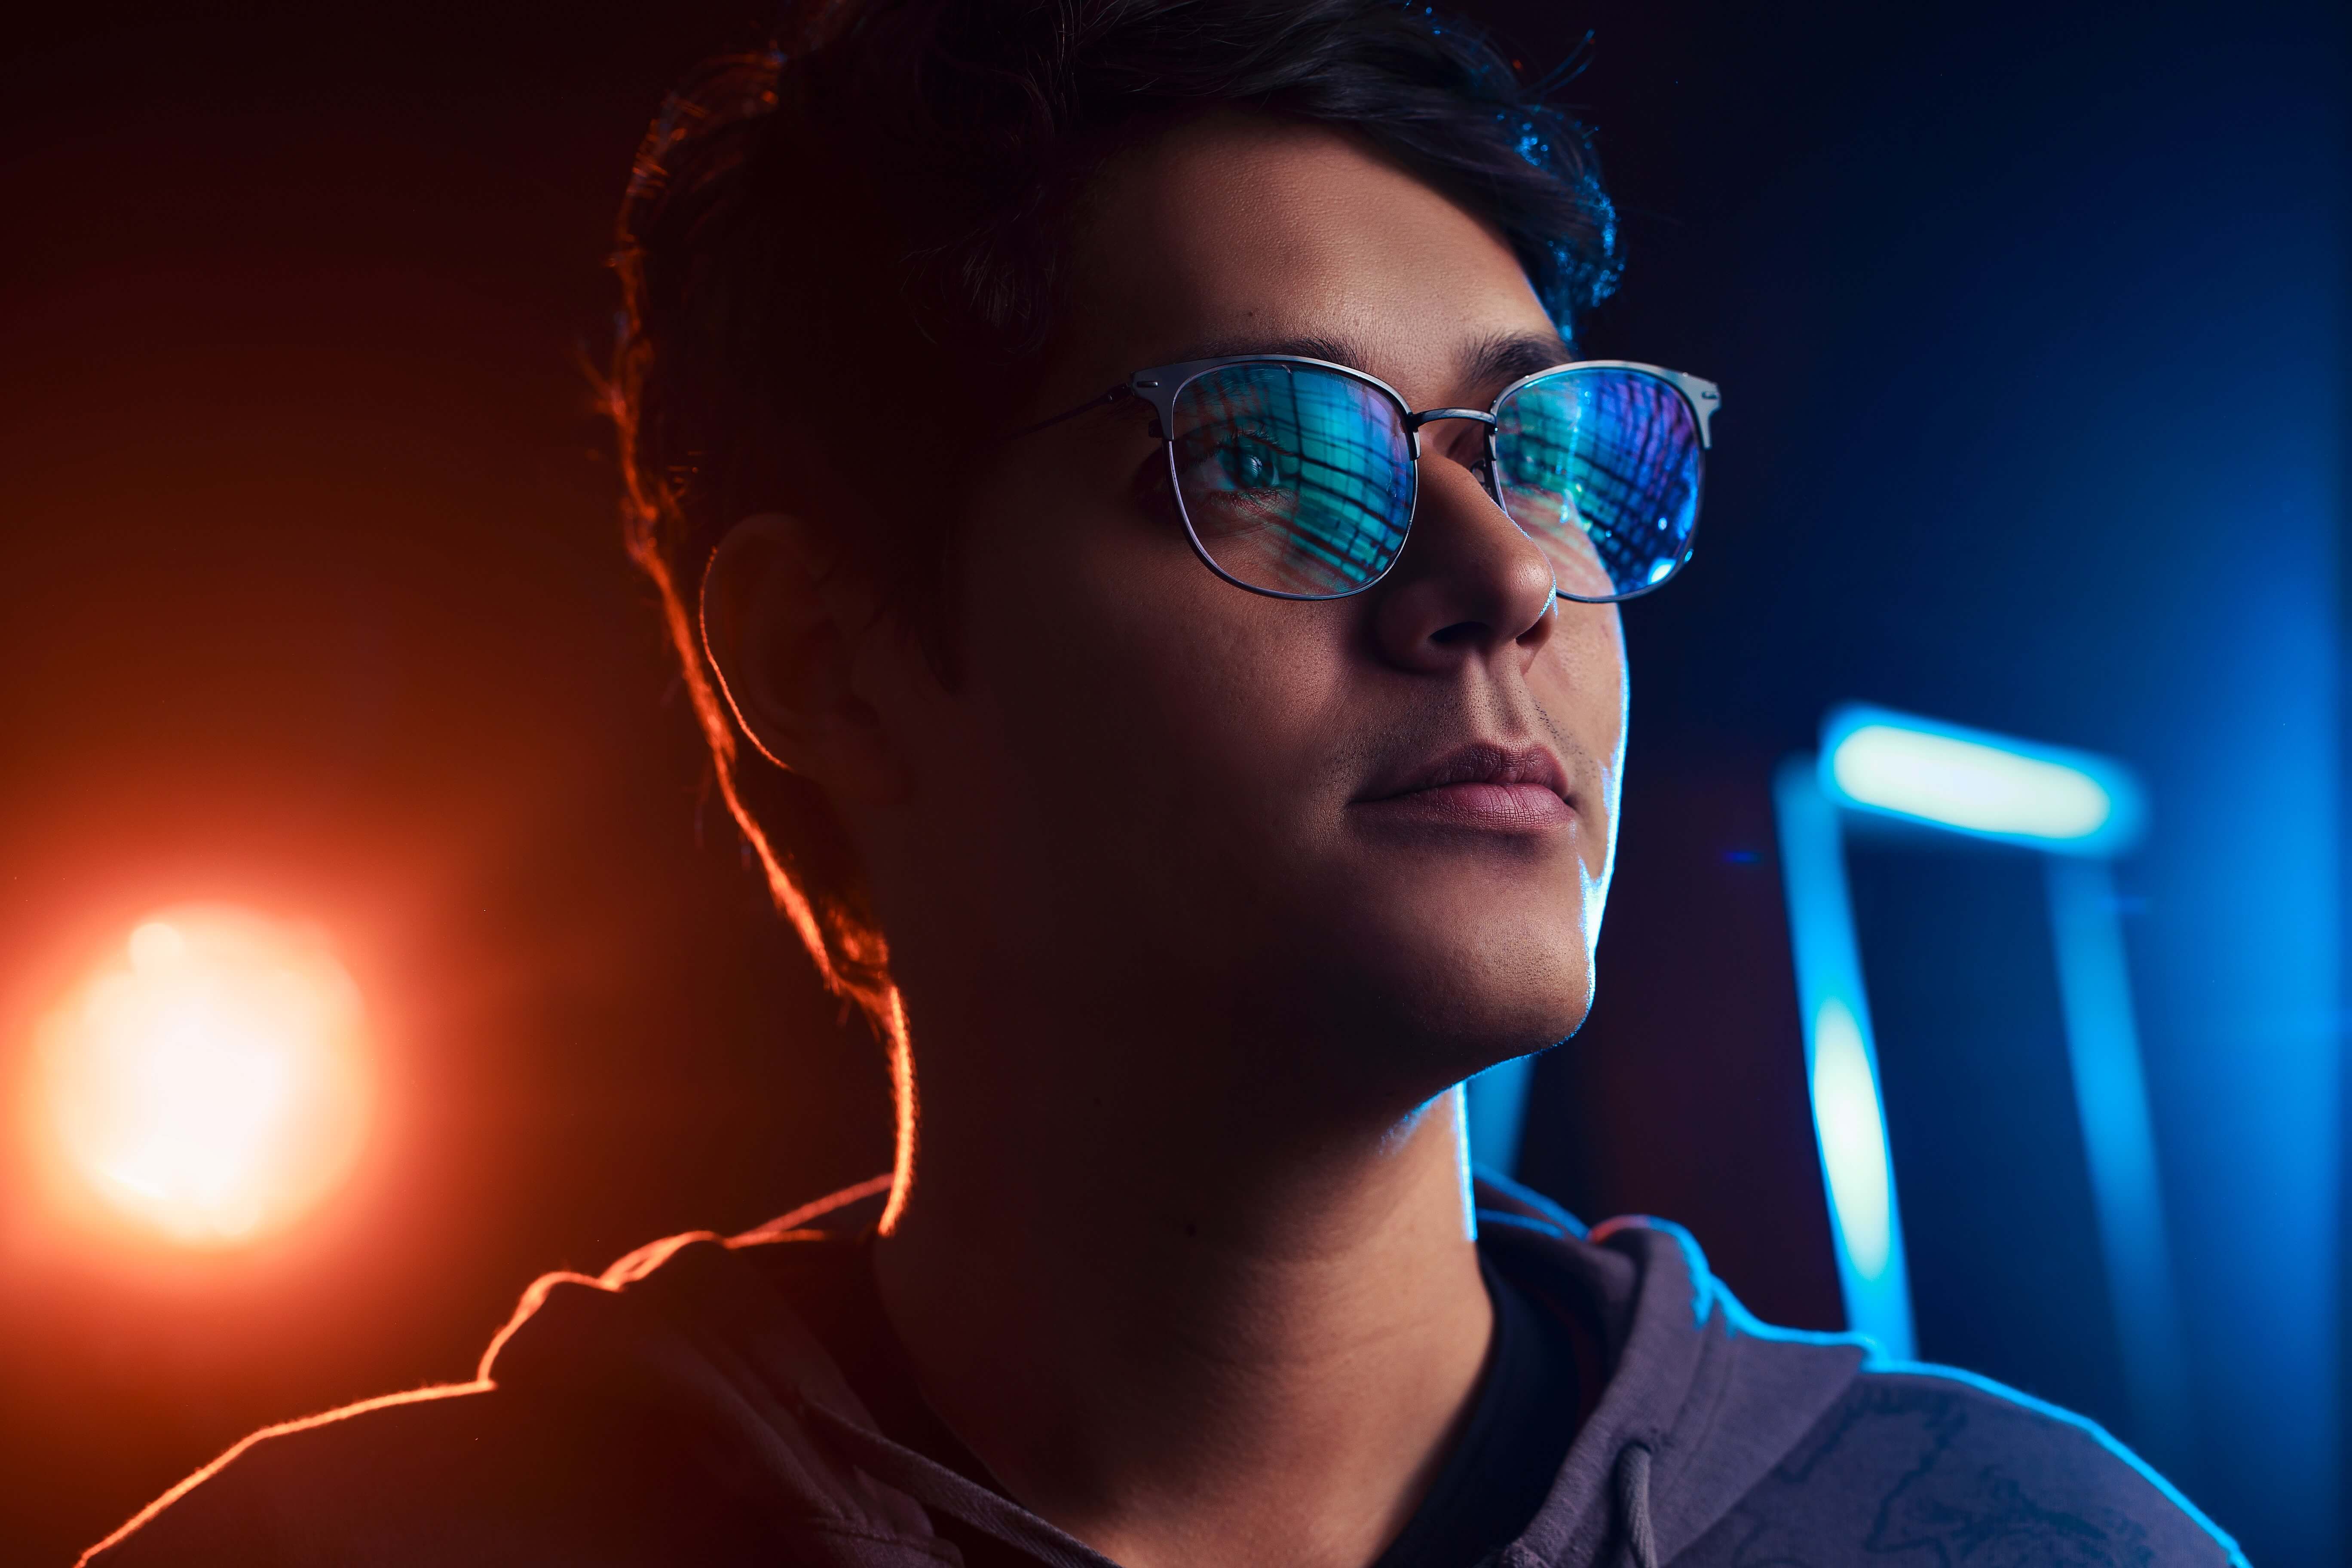 A young man with dark hair models blue light blocking glasses.